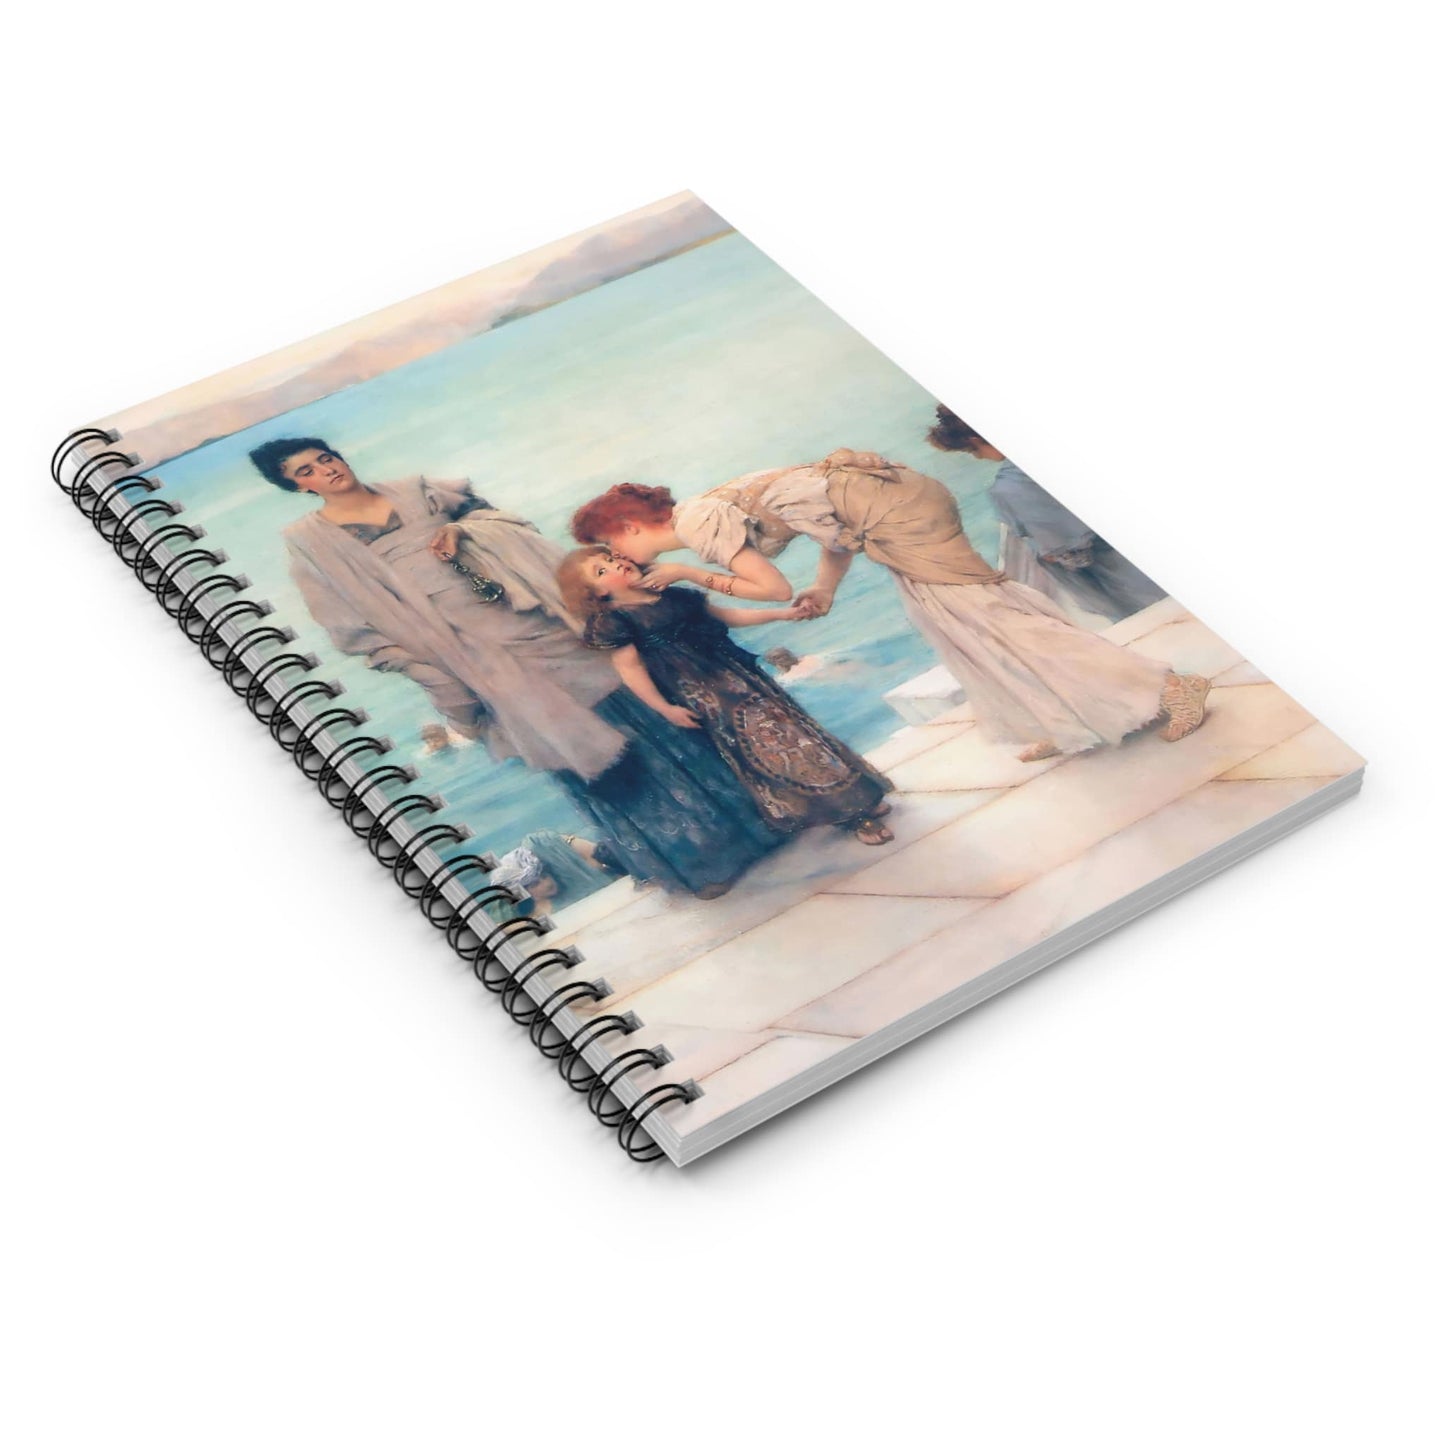 Romanticism Spiral Notebook Laying Flat on White Surface